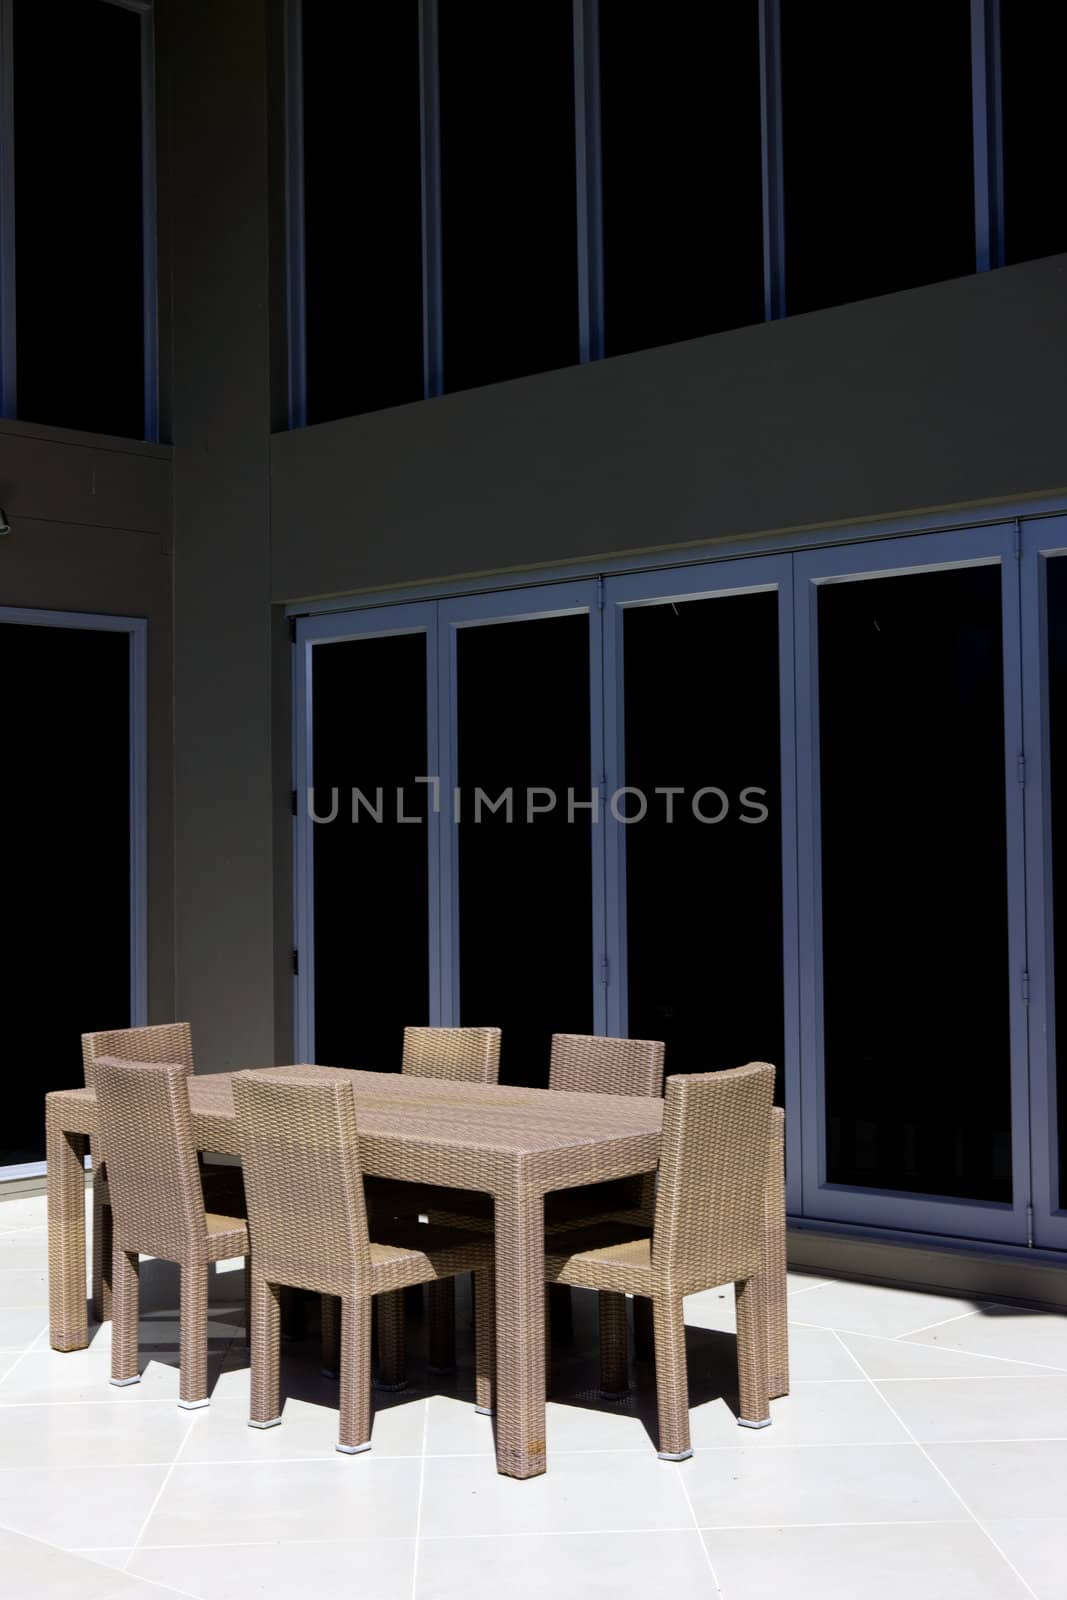 Empty table and chairs standing in th sunshine on the porch of an upmarket residence in front of large glass doors or windows